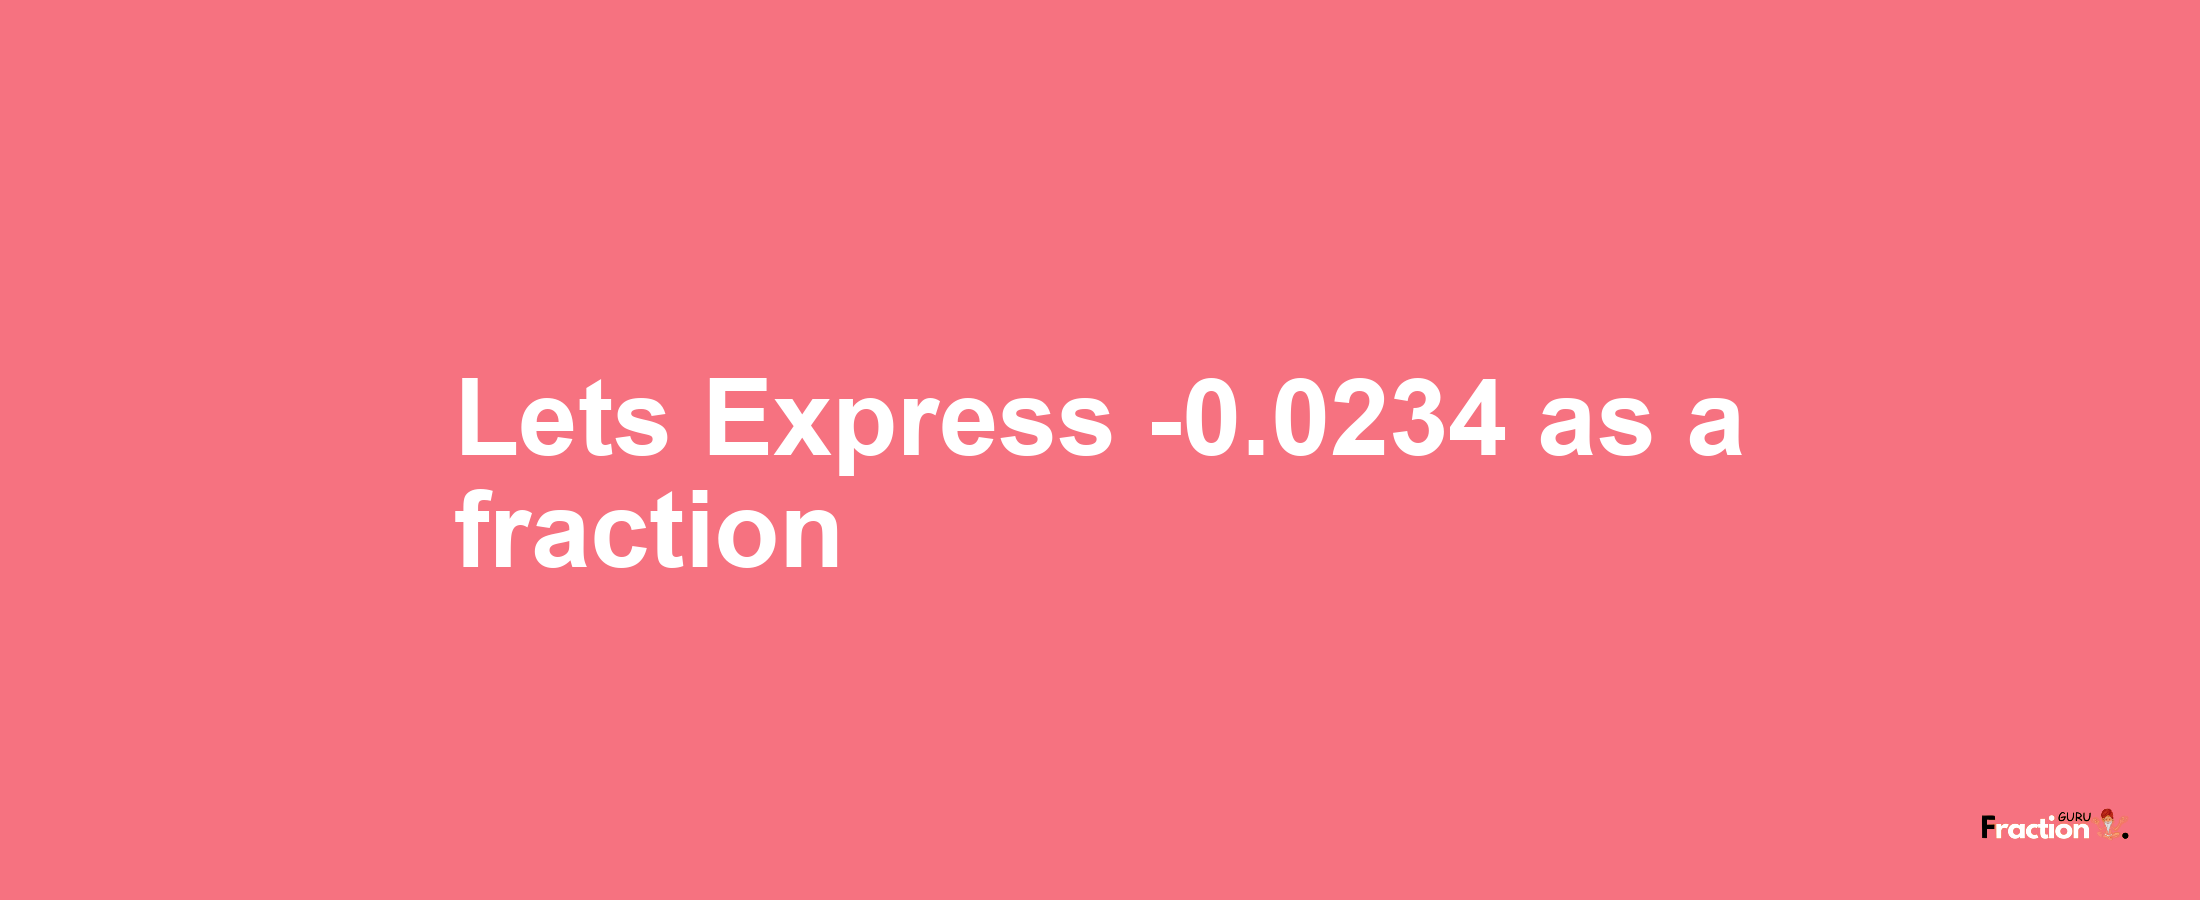 Lets Express -0.0234 as afraction